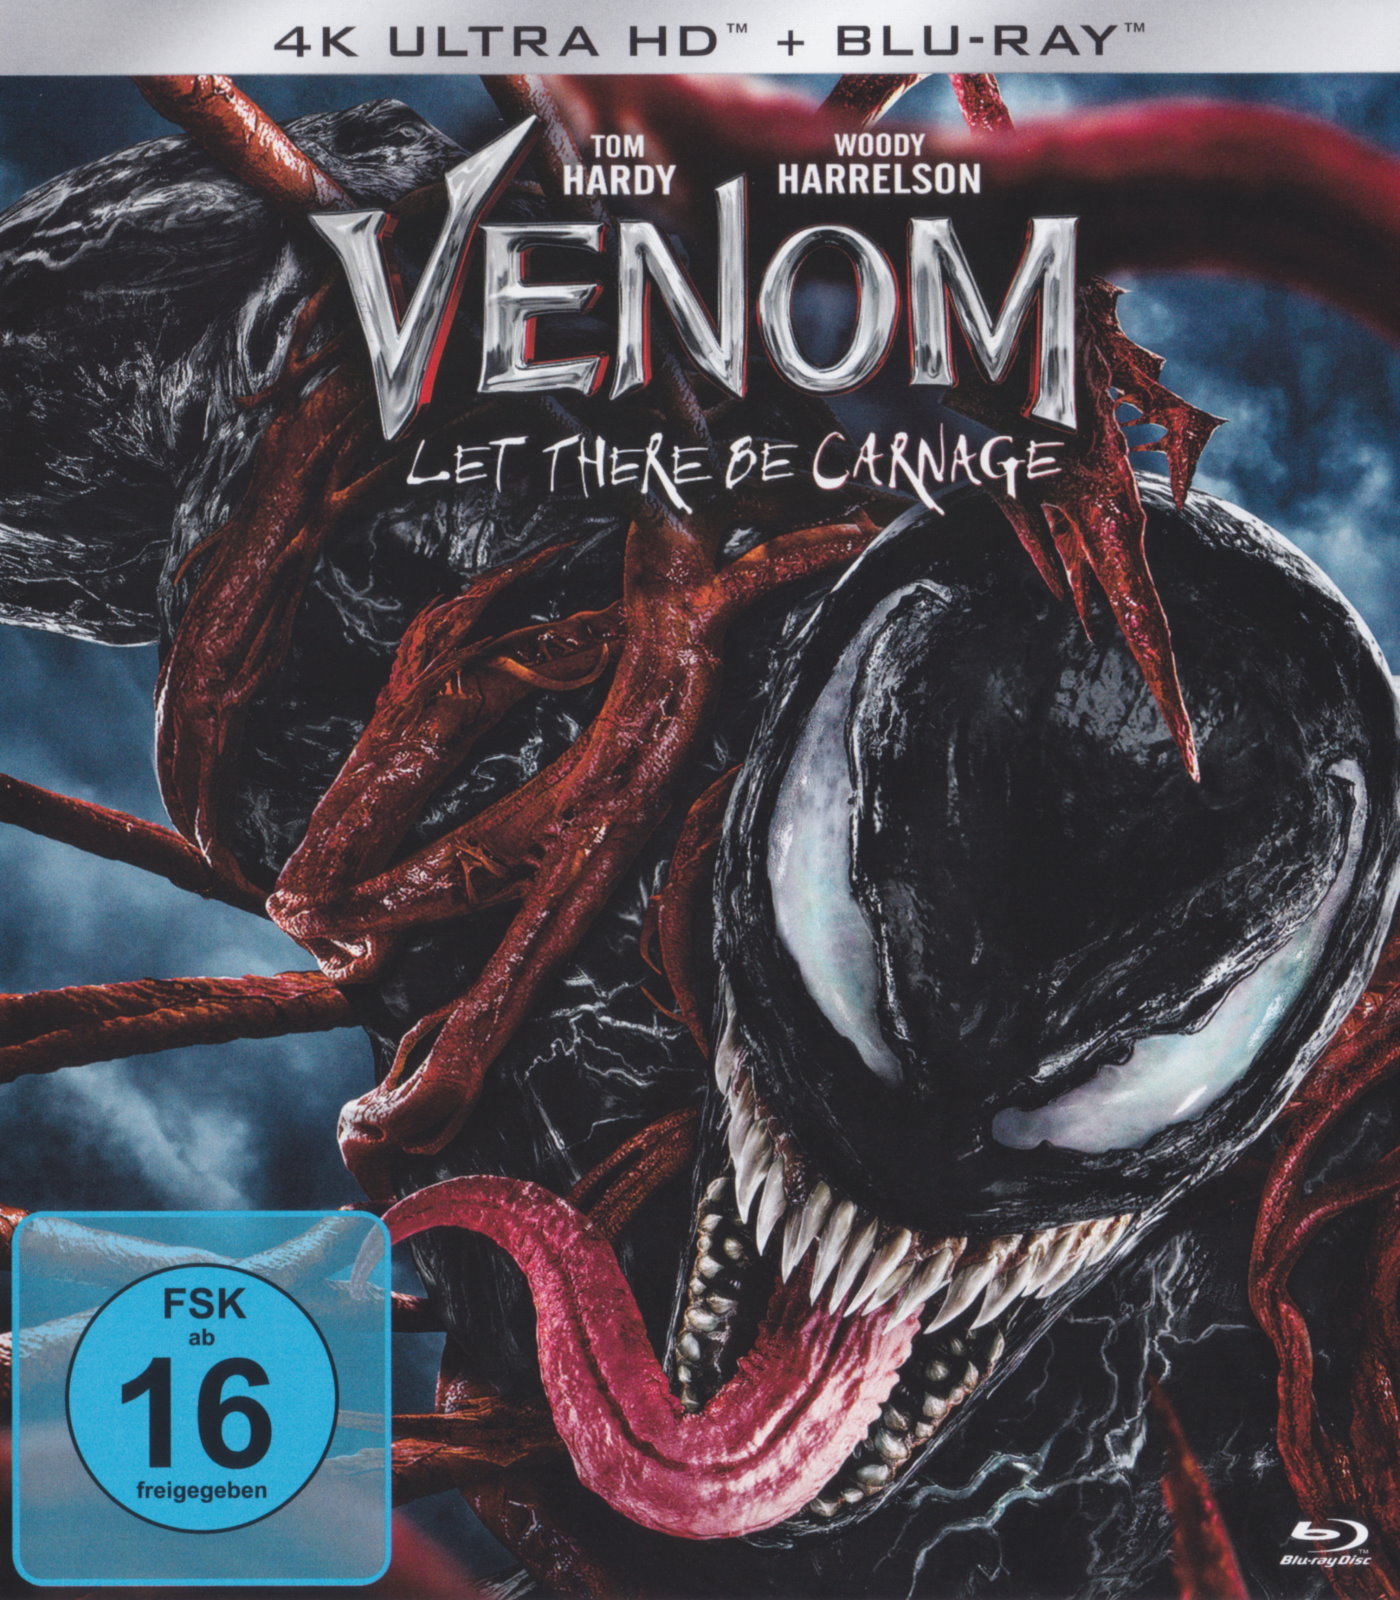 Cover - Venom - Let There Be Carnage.jpg